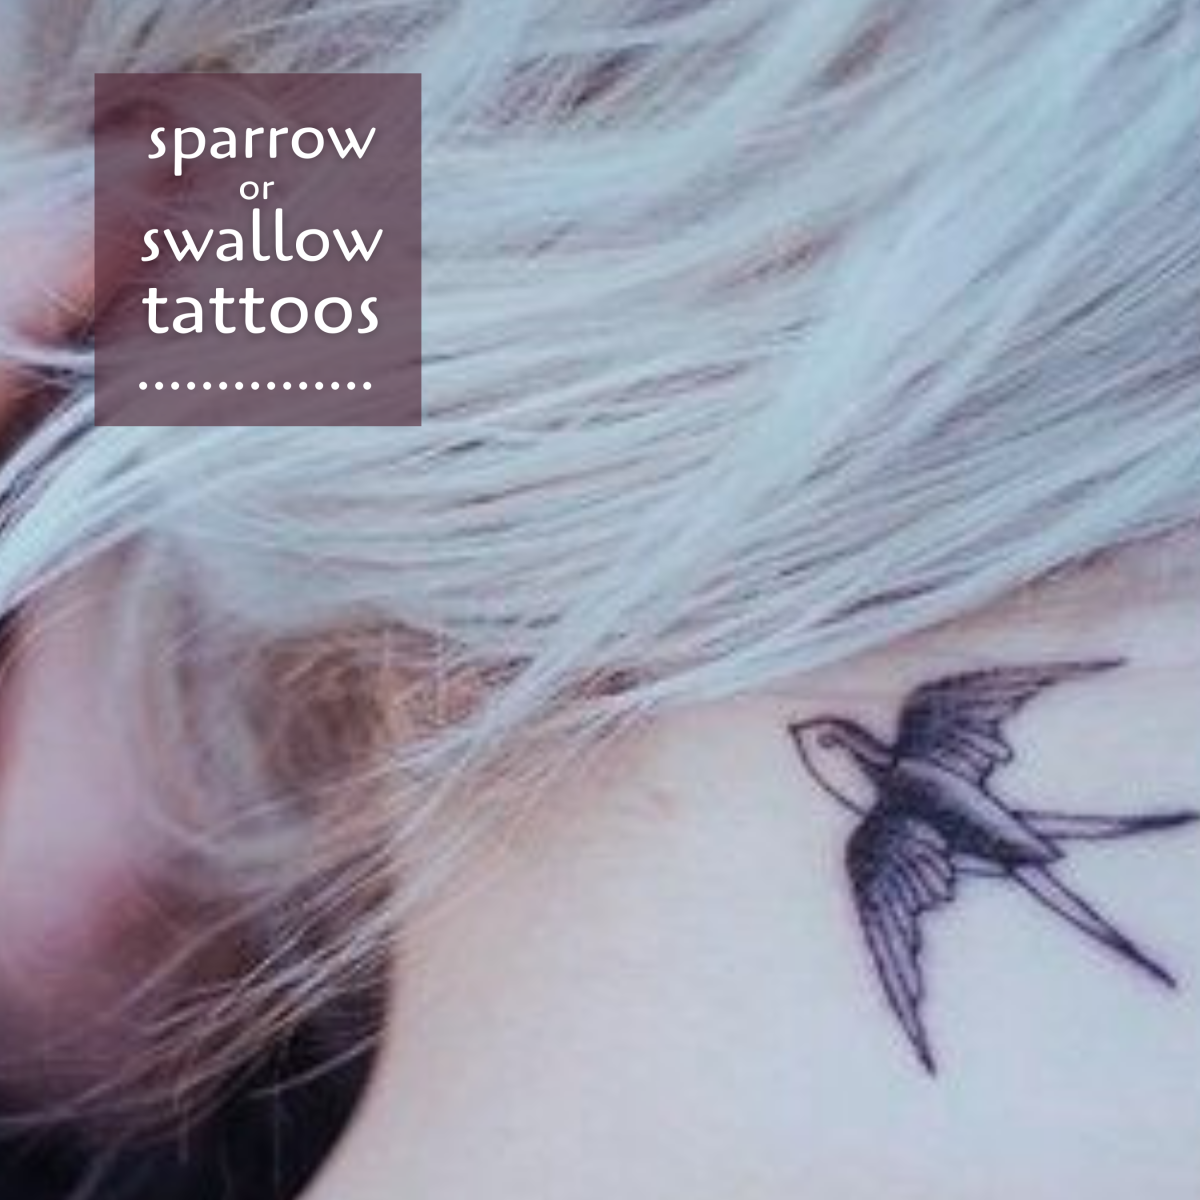 Sparrow or swallow tattoo... what's the difference? (Clue: swallows have split tails.)